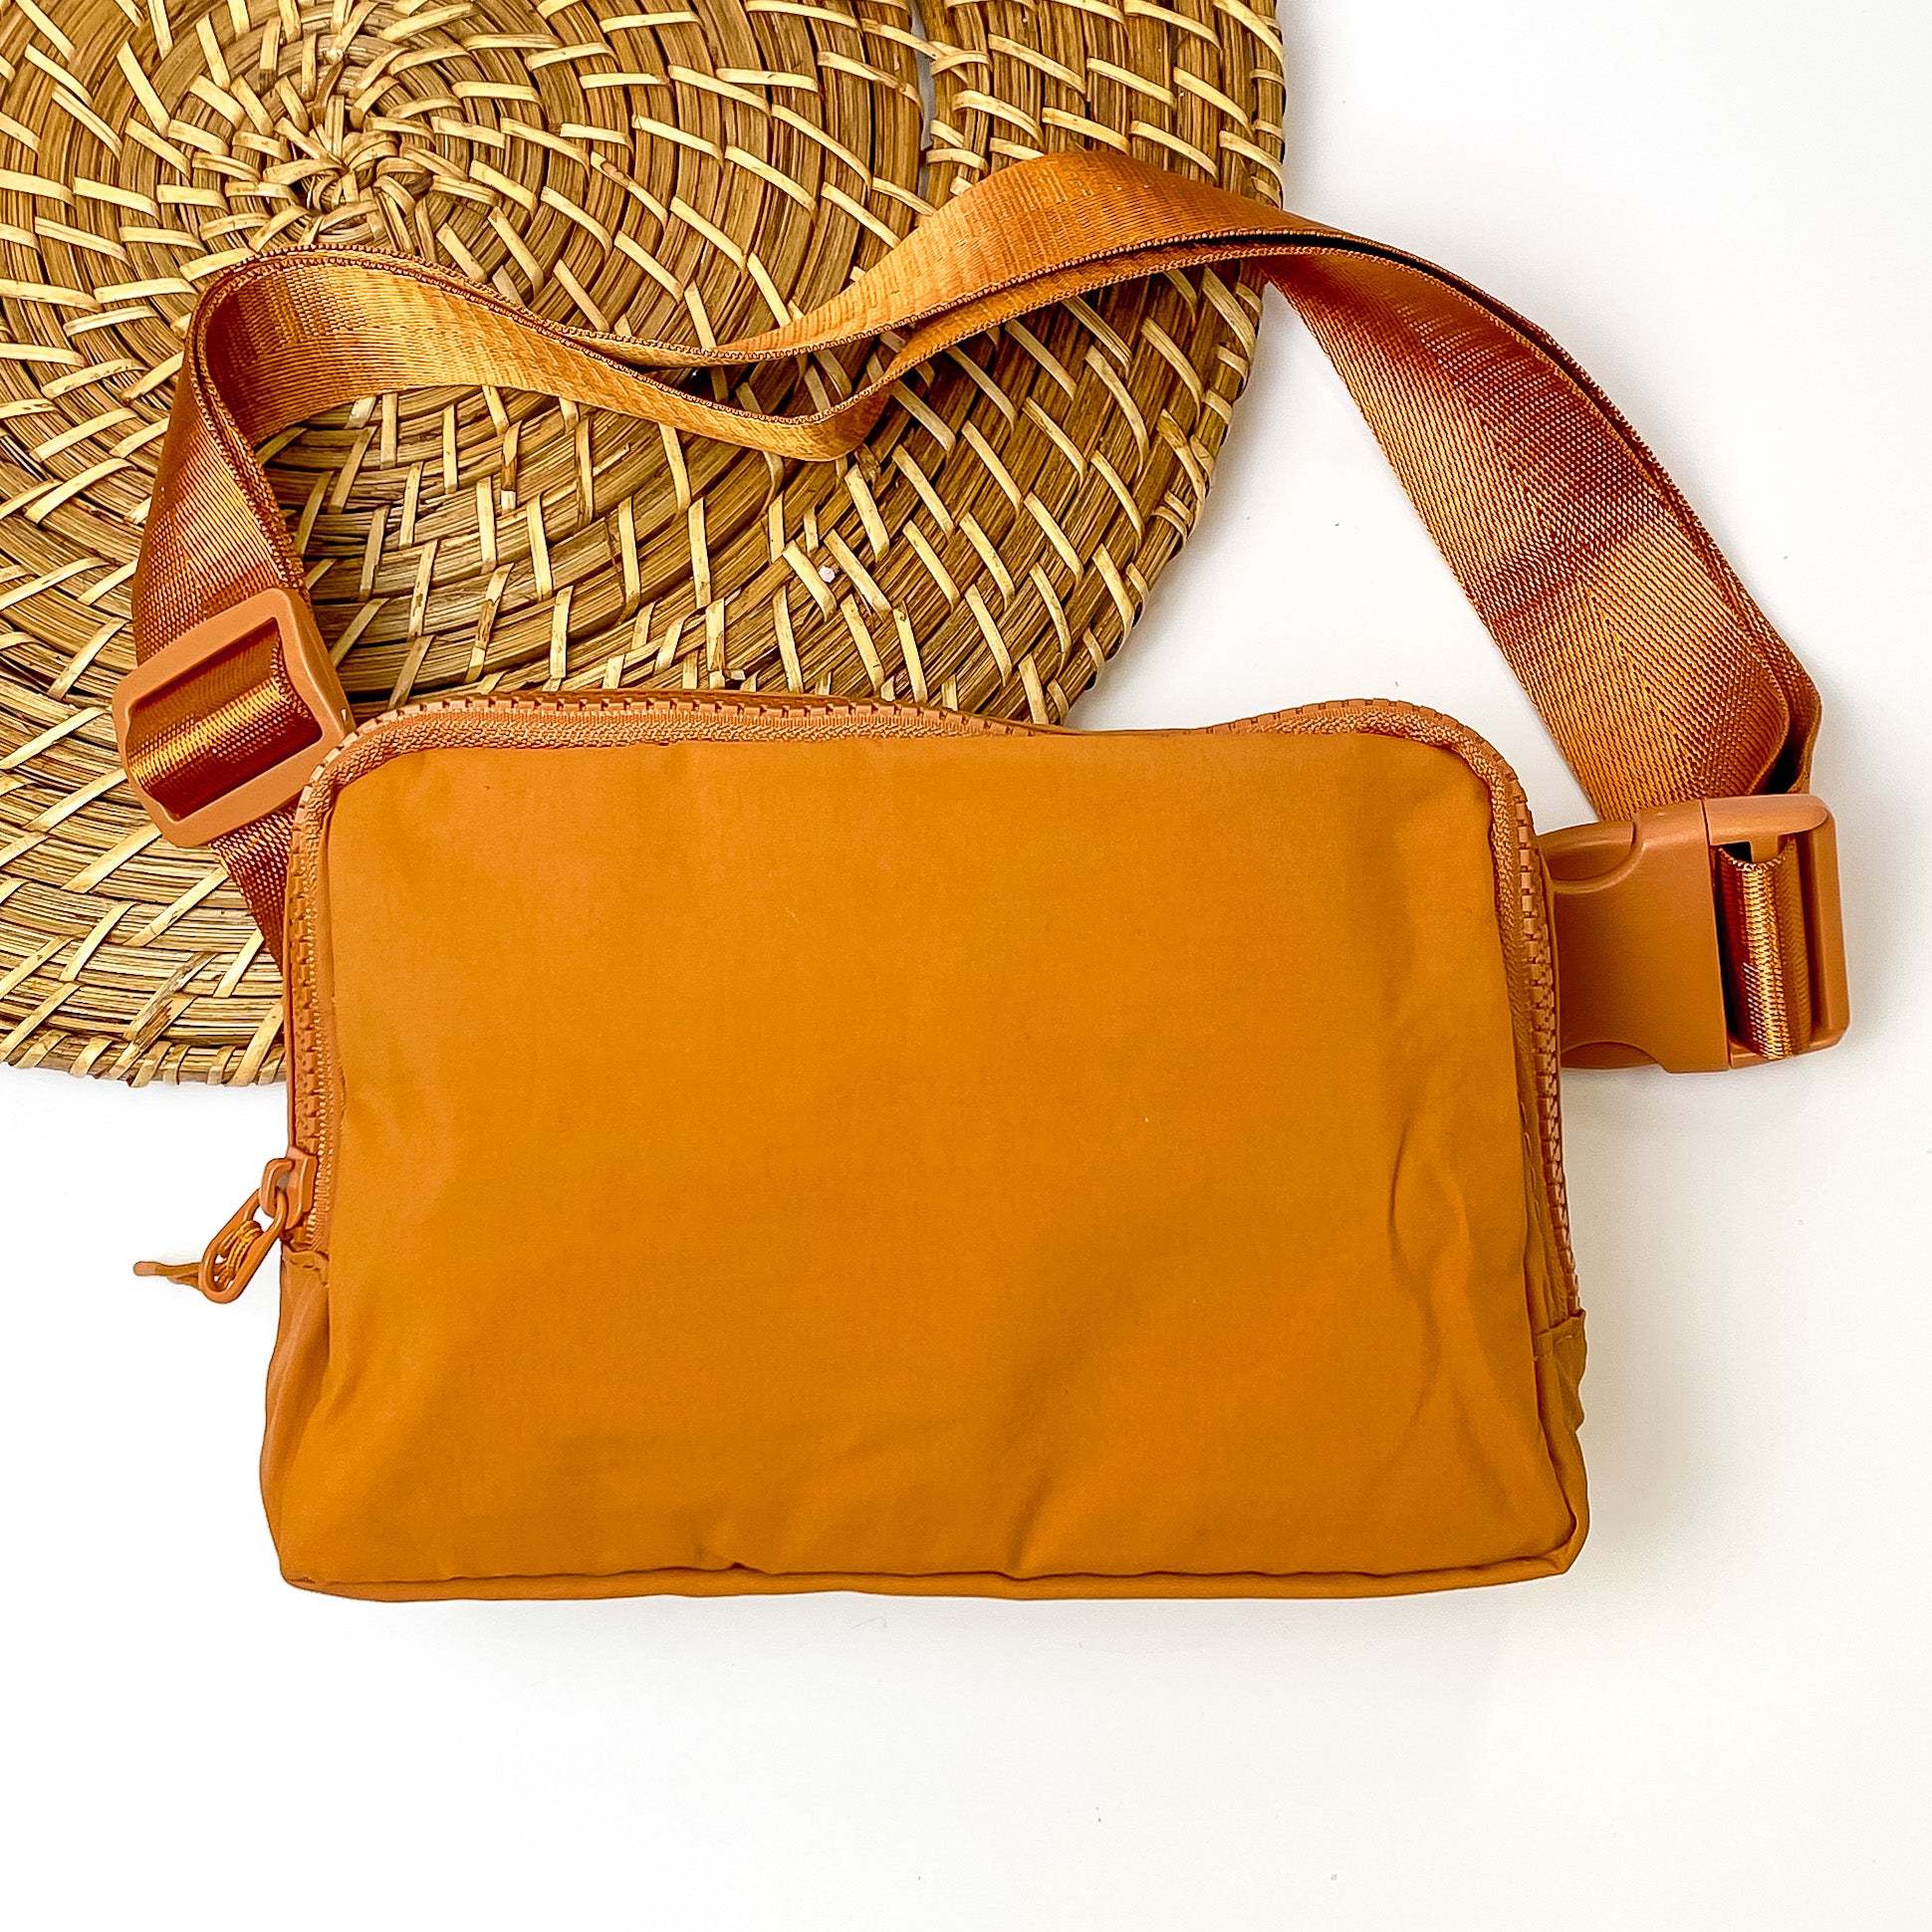 Pictured is a rectangle fanny pack with a top zipper with tassel in tan. This bag also includes a tan strap and tan accents. This bag is pictured on a white and brown patterned background. 